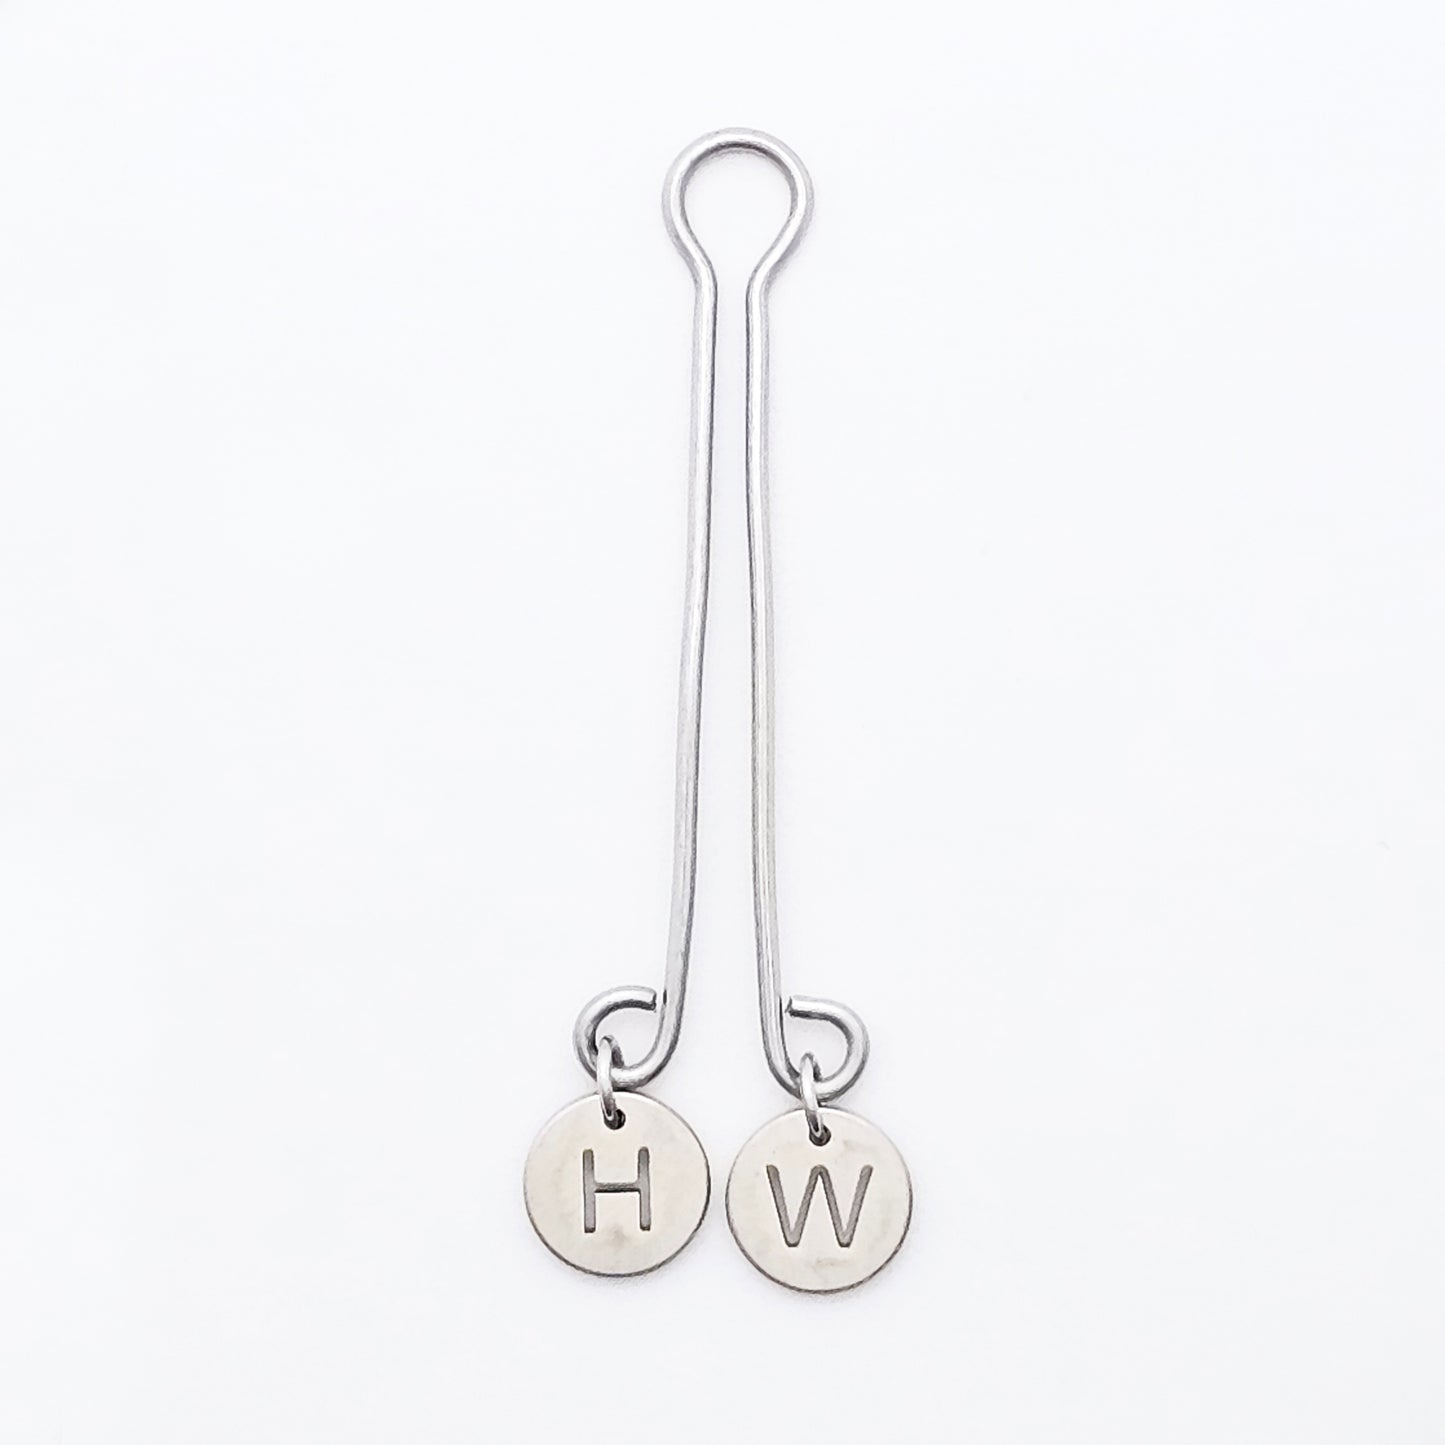 Hotwife Labia Clip, Stainless Steel, Non-Piercing Clitoral Body Jewelry. H W Lifestyle. Intimate Vaginal Jewelry for Hot Wife.